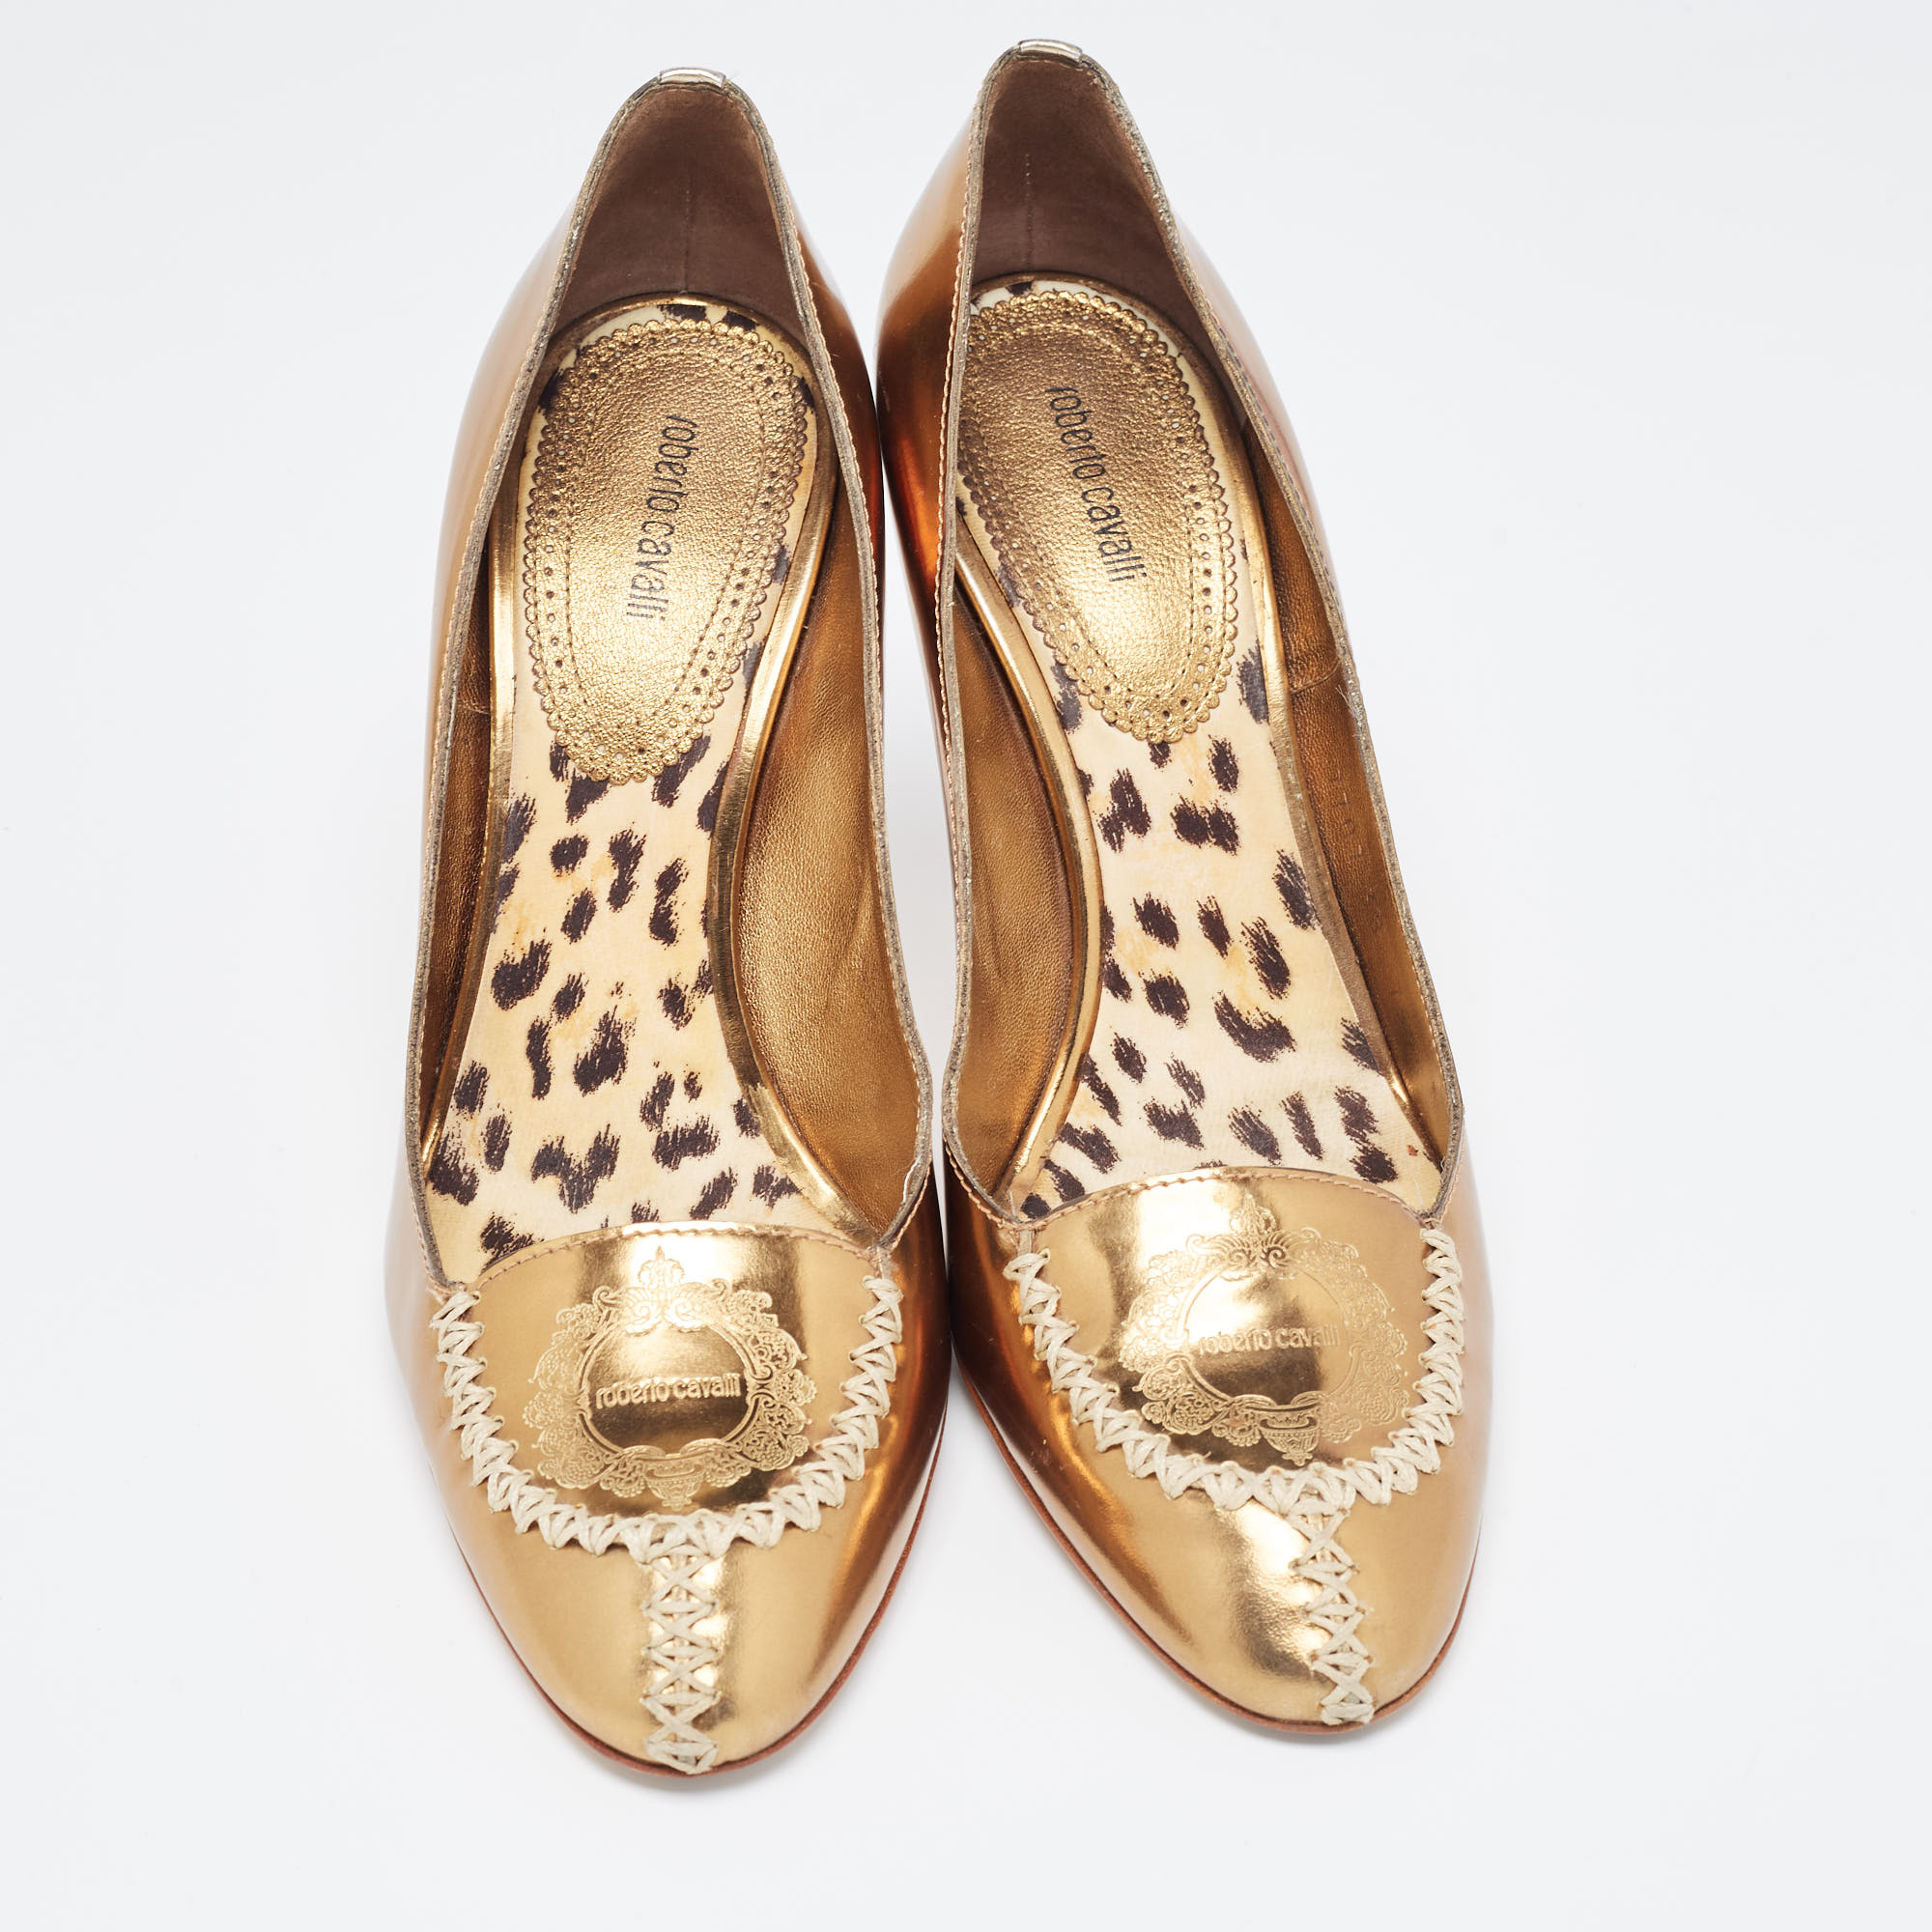 Roberto Cavalli Golden Foil Leather Loafers Pumps Size 38.5